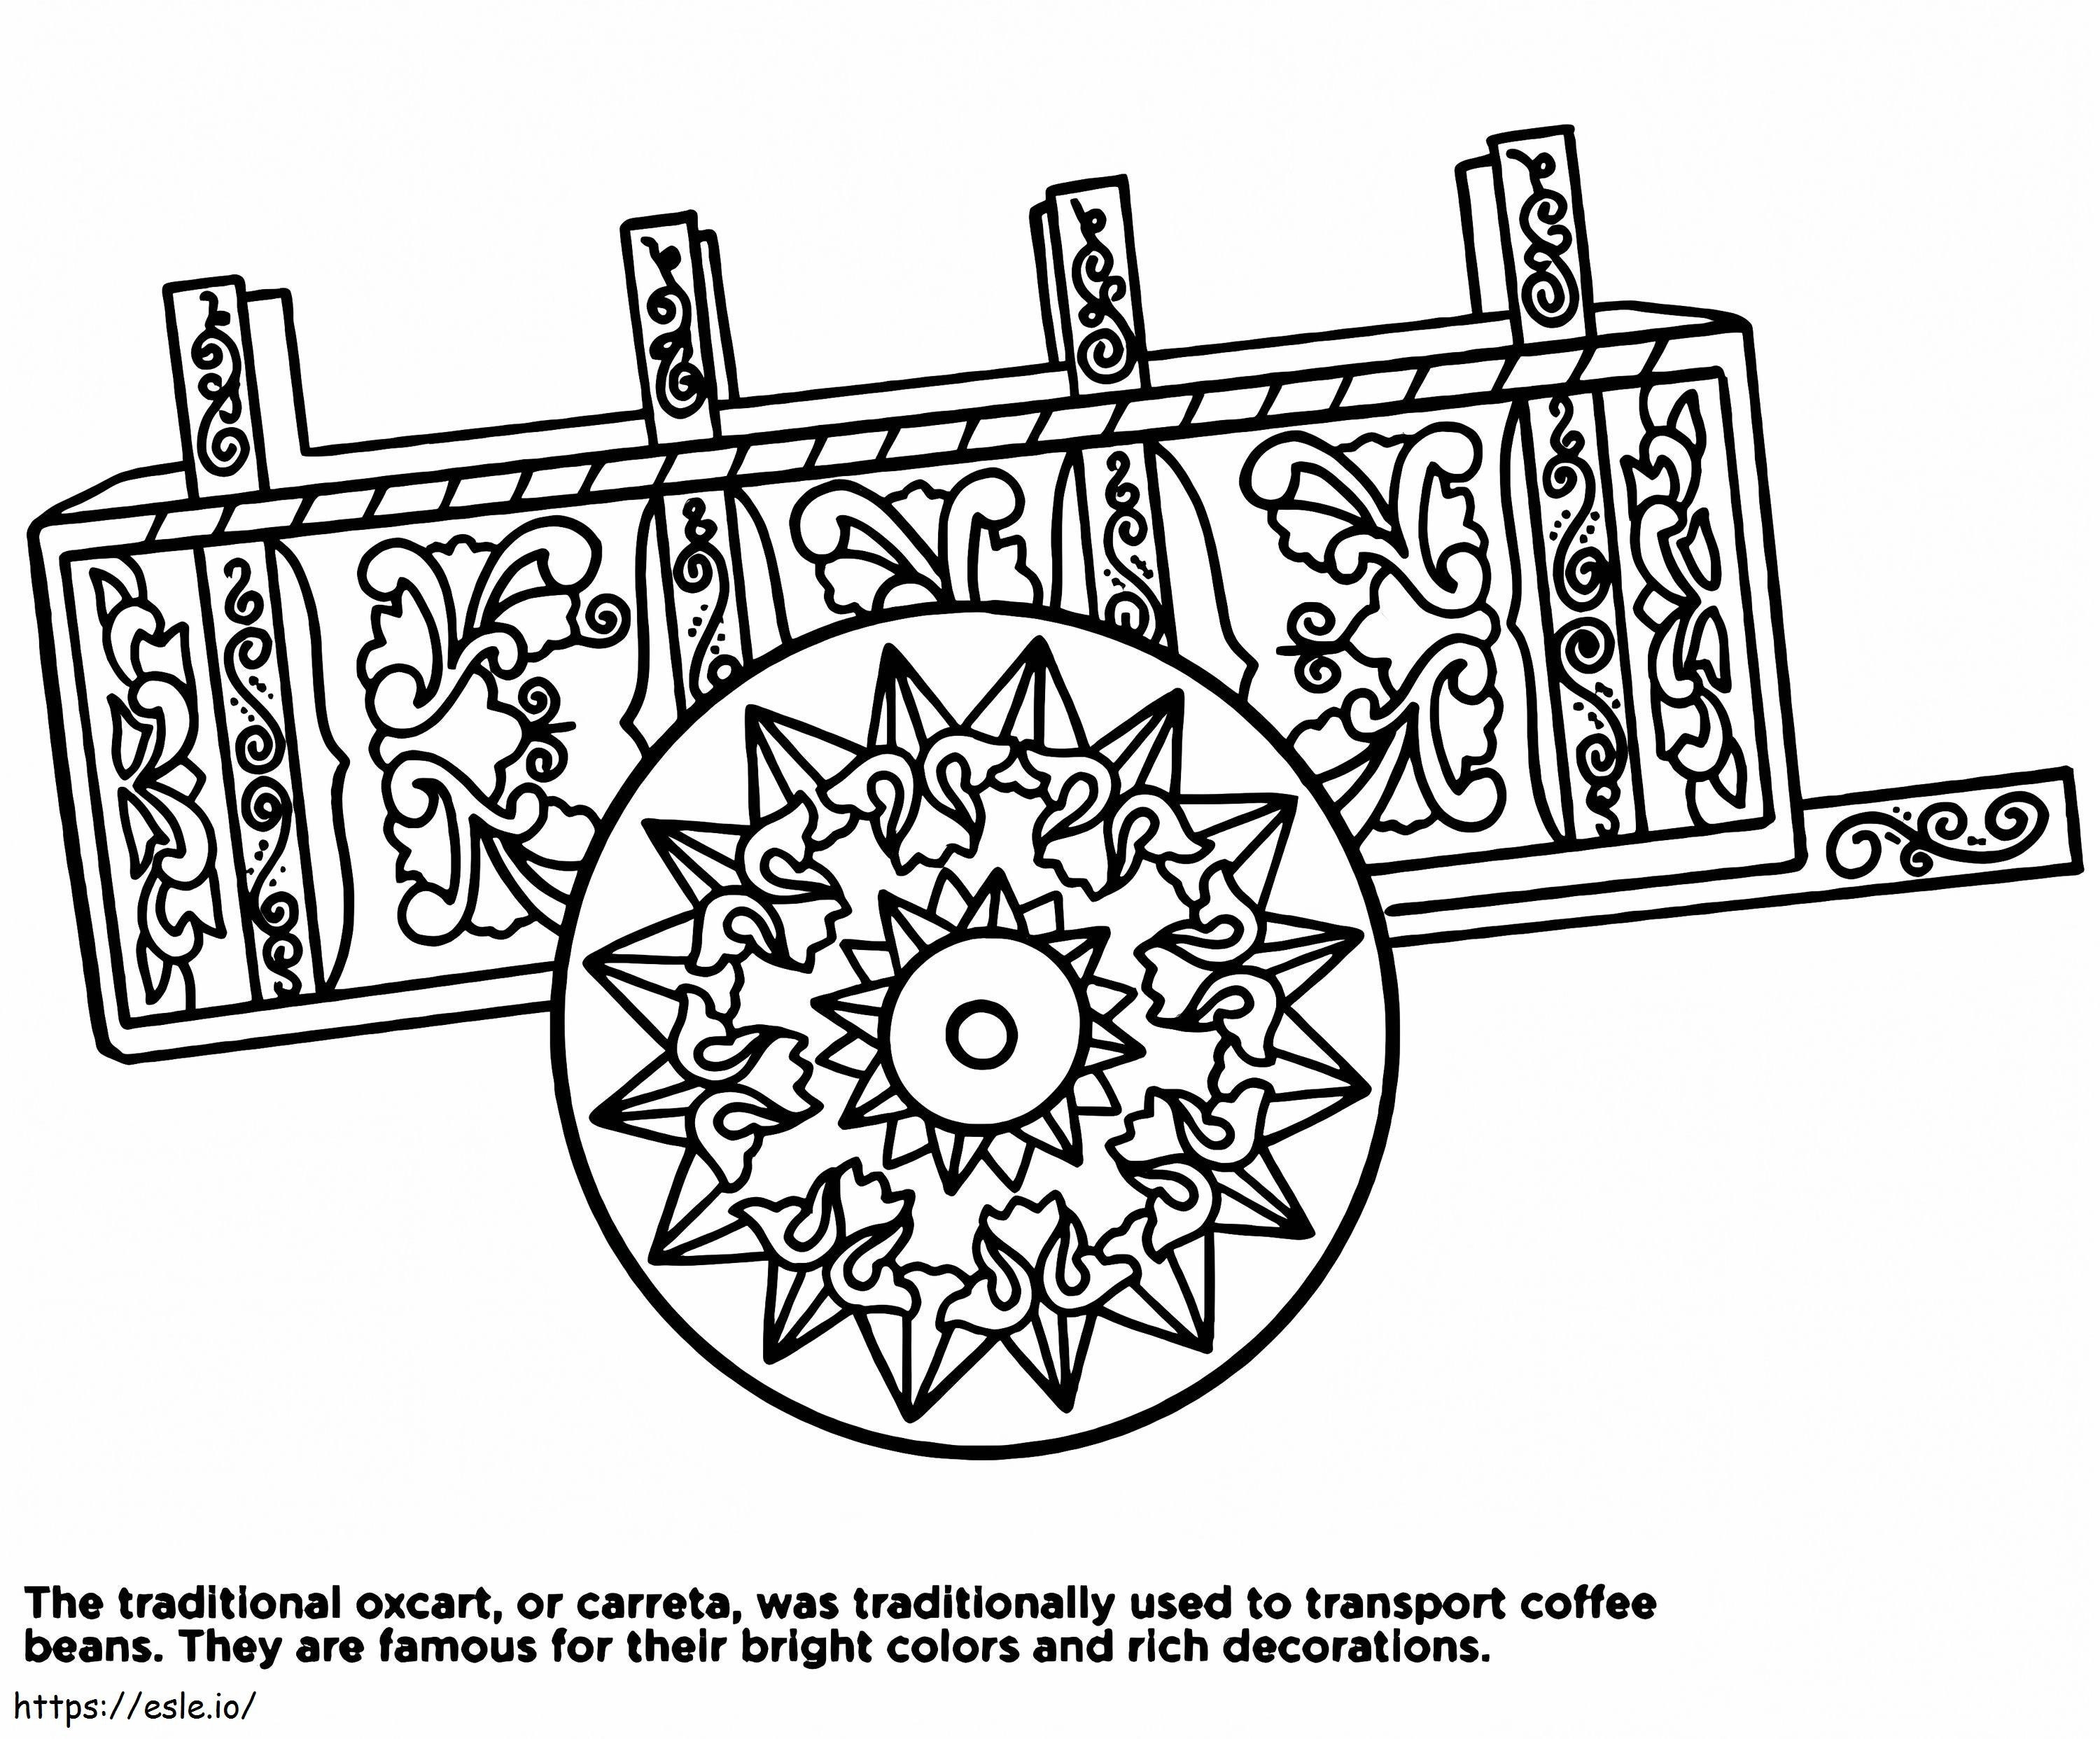 Costa Rica Oxcart coloring page